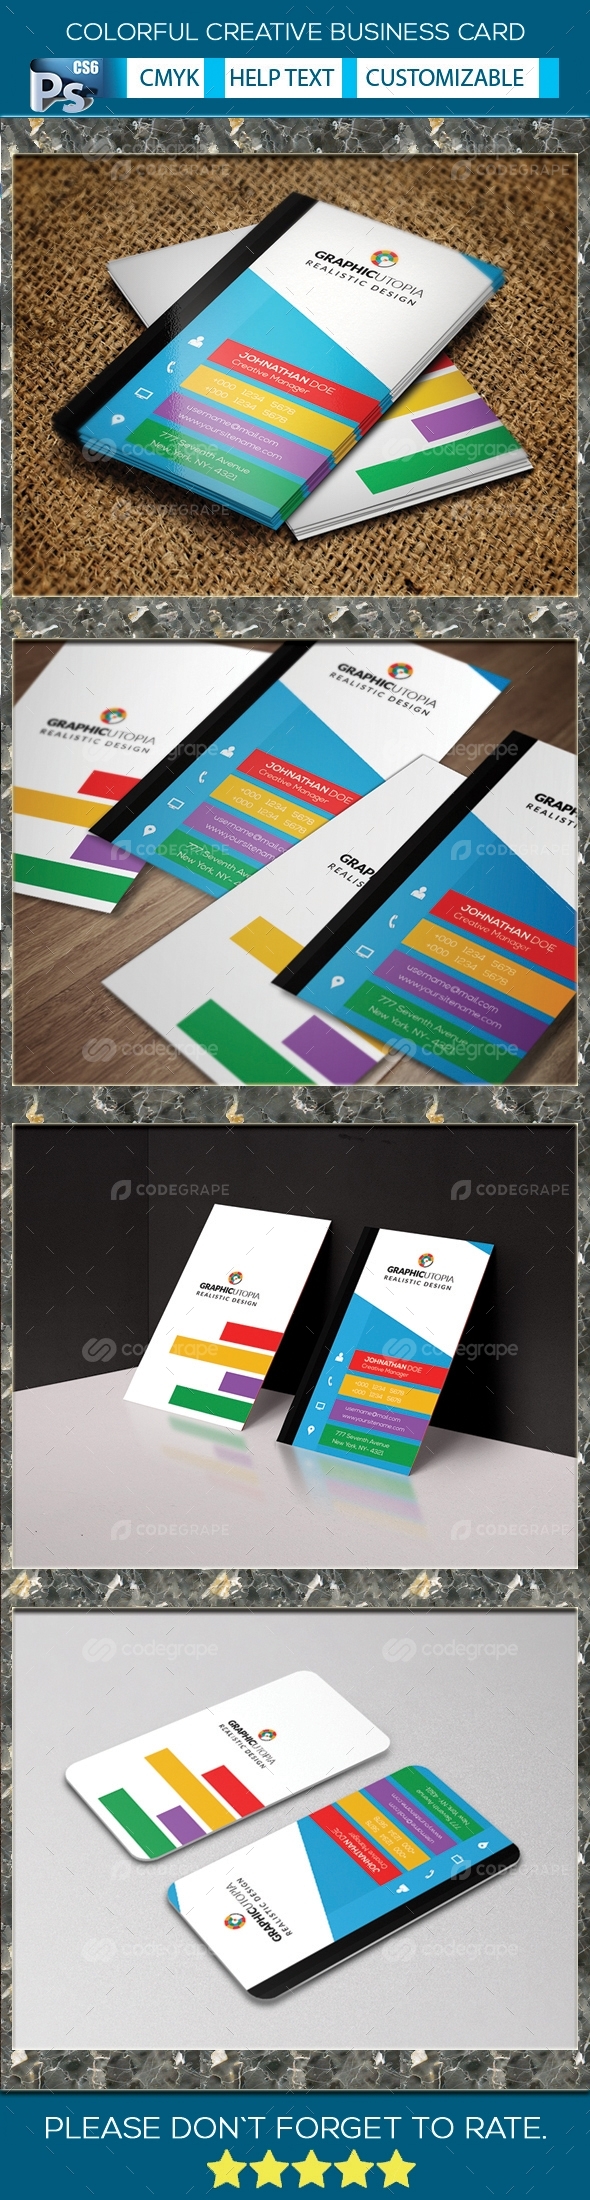 Colorful Creative Business Card